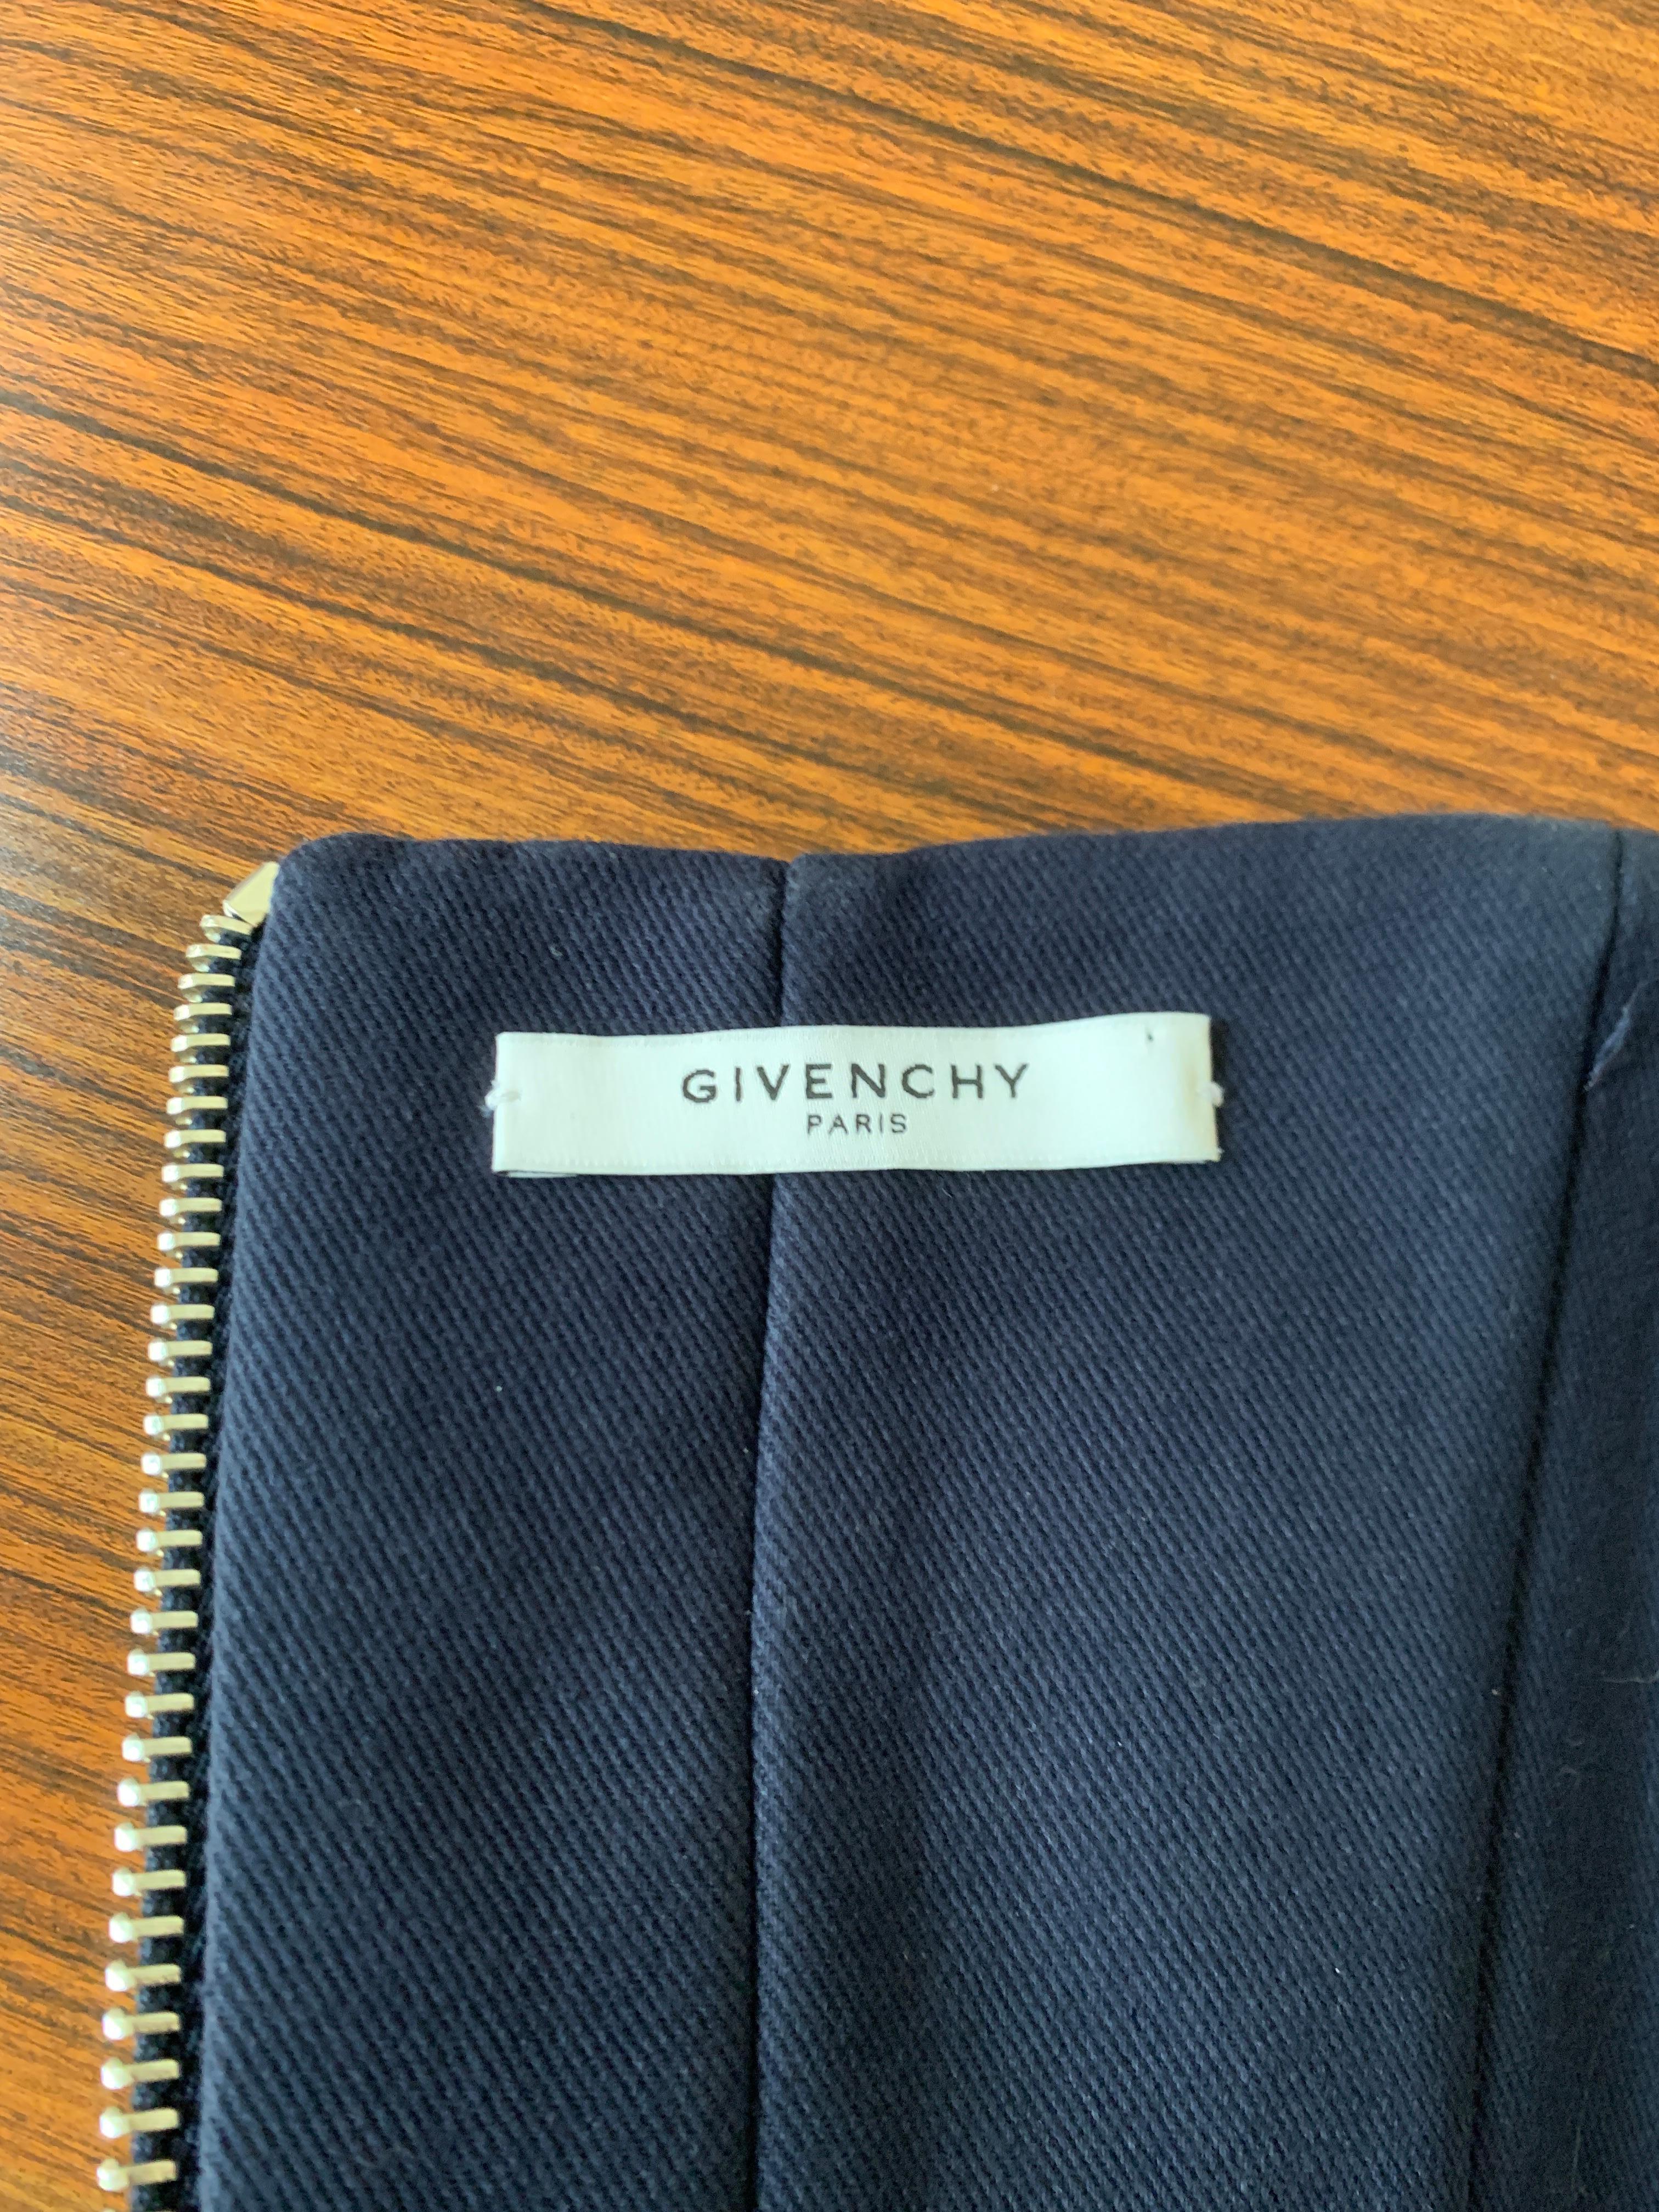 Givenchy Dark Denim Bustier Corset Strapless Top Stitch and Zipper Detail In Good Condition For Sale In San Francisco, CA